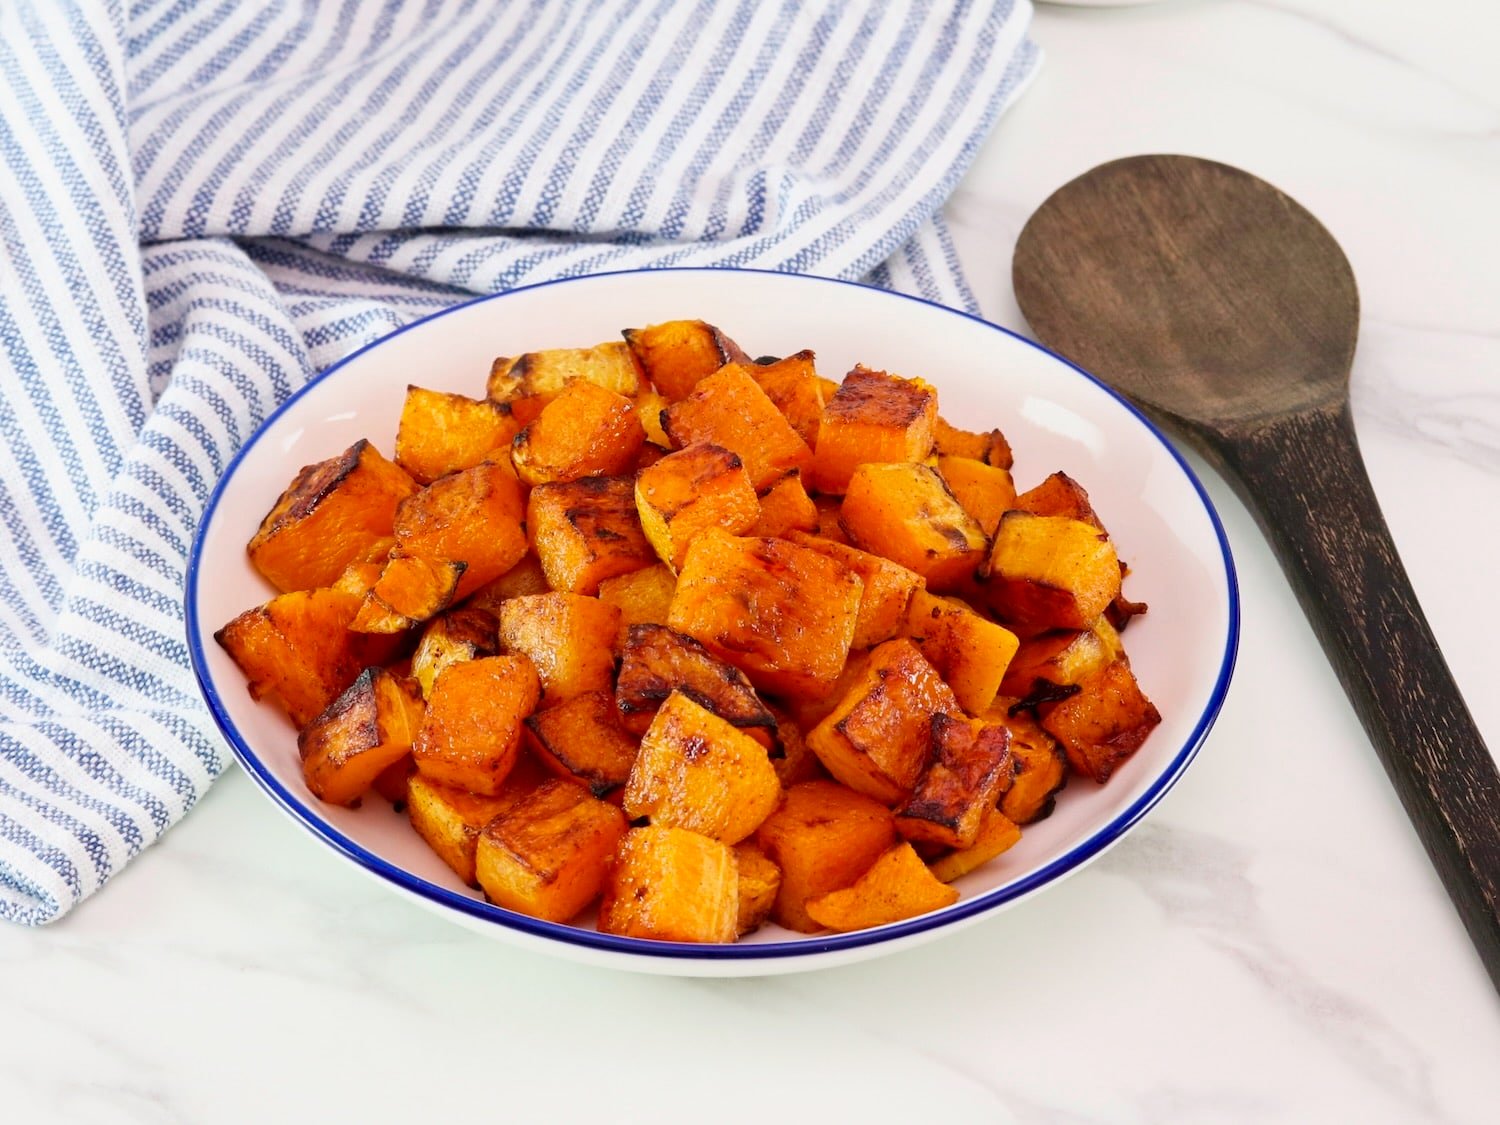 Maple Roasted Butternut Squash in a large serving bowl on a marble countertop. Blue and white linen striped cloth towel and dark wooden spoon beside the bowl.